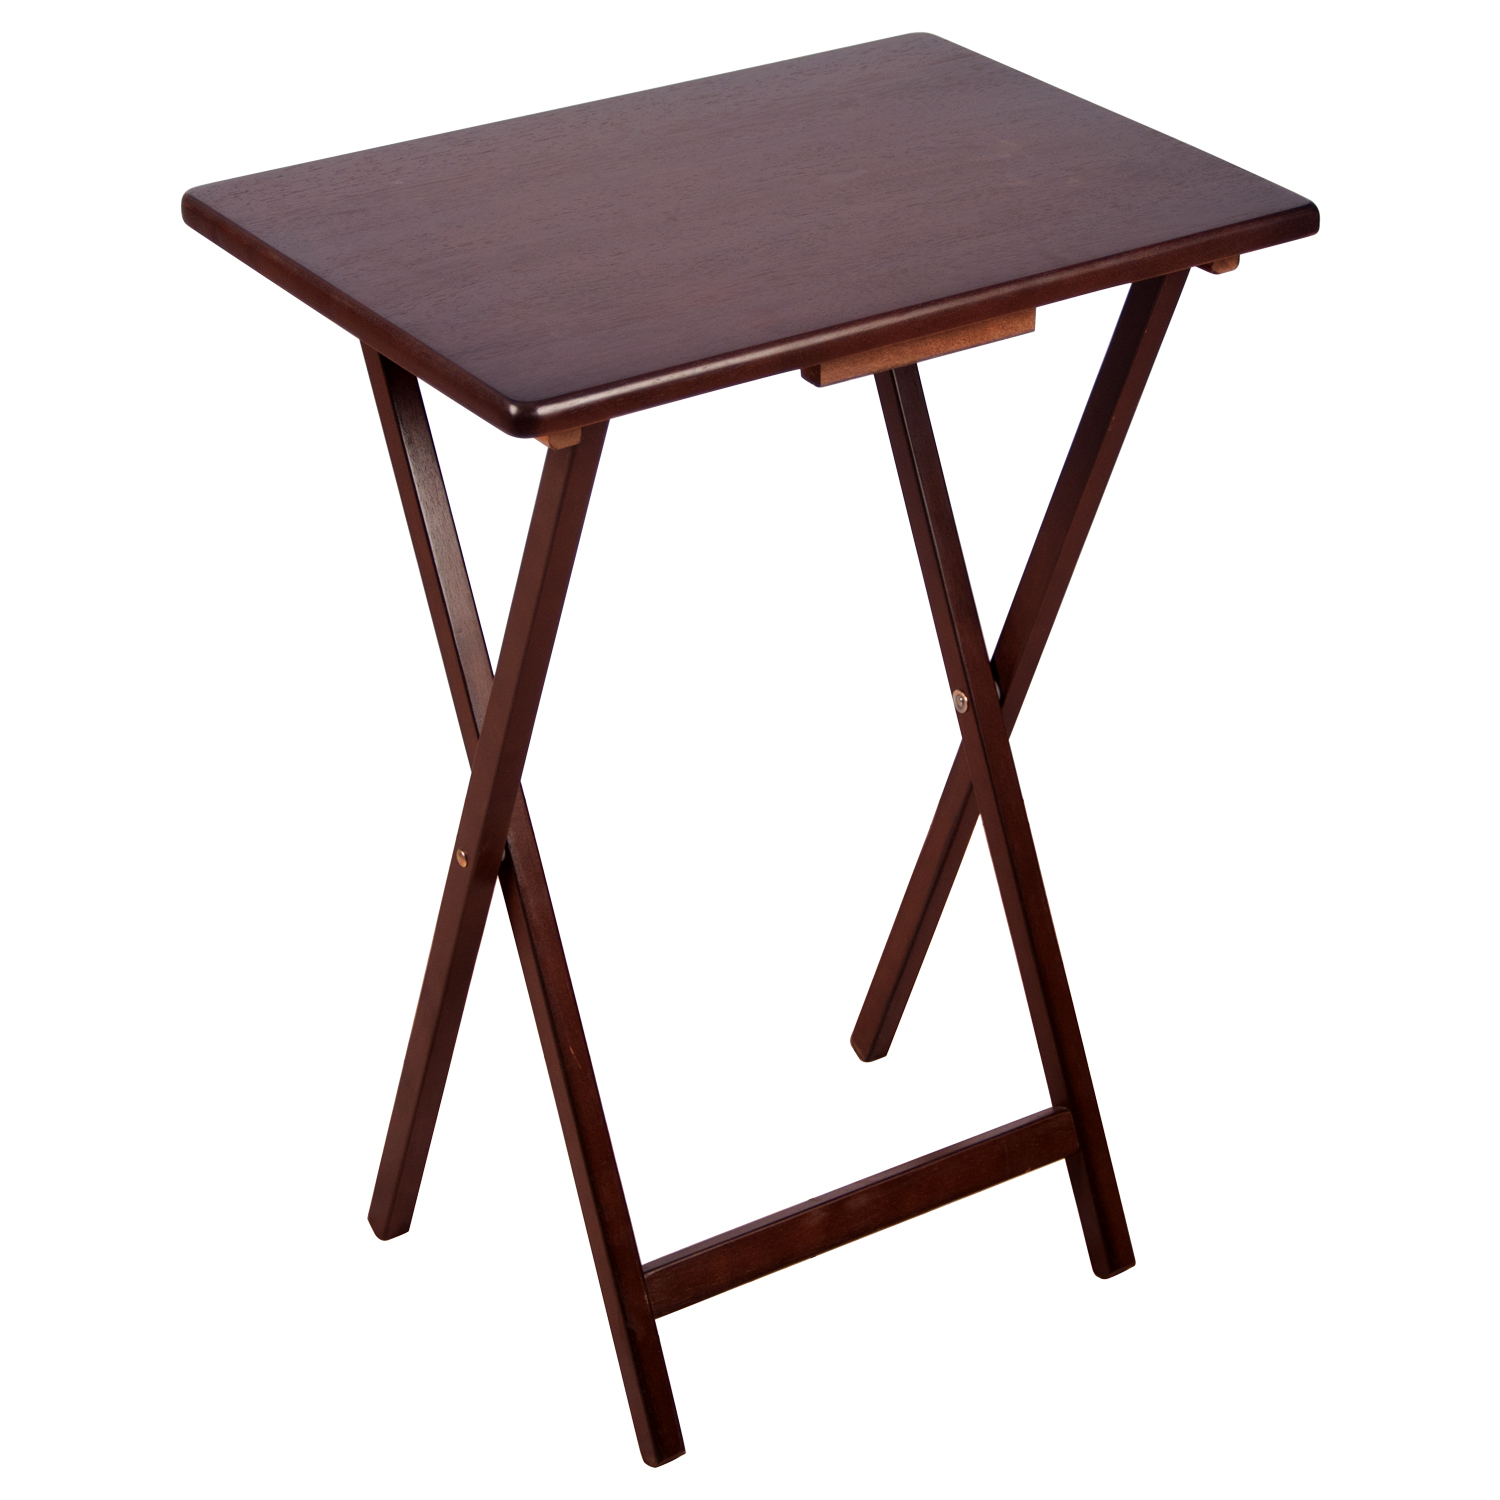 Folding TV tray table - Rosewood. Colour: brown